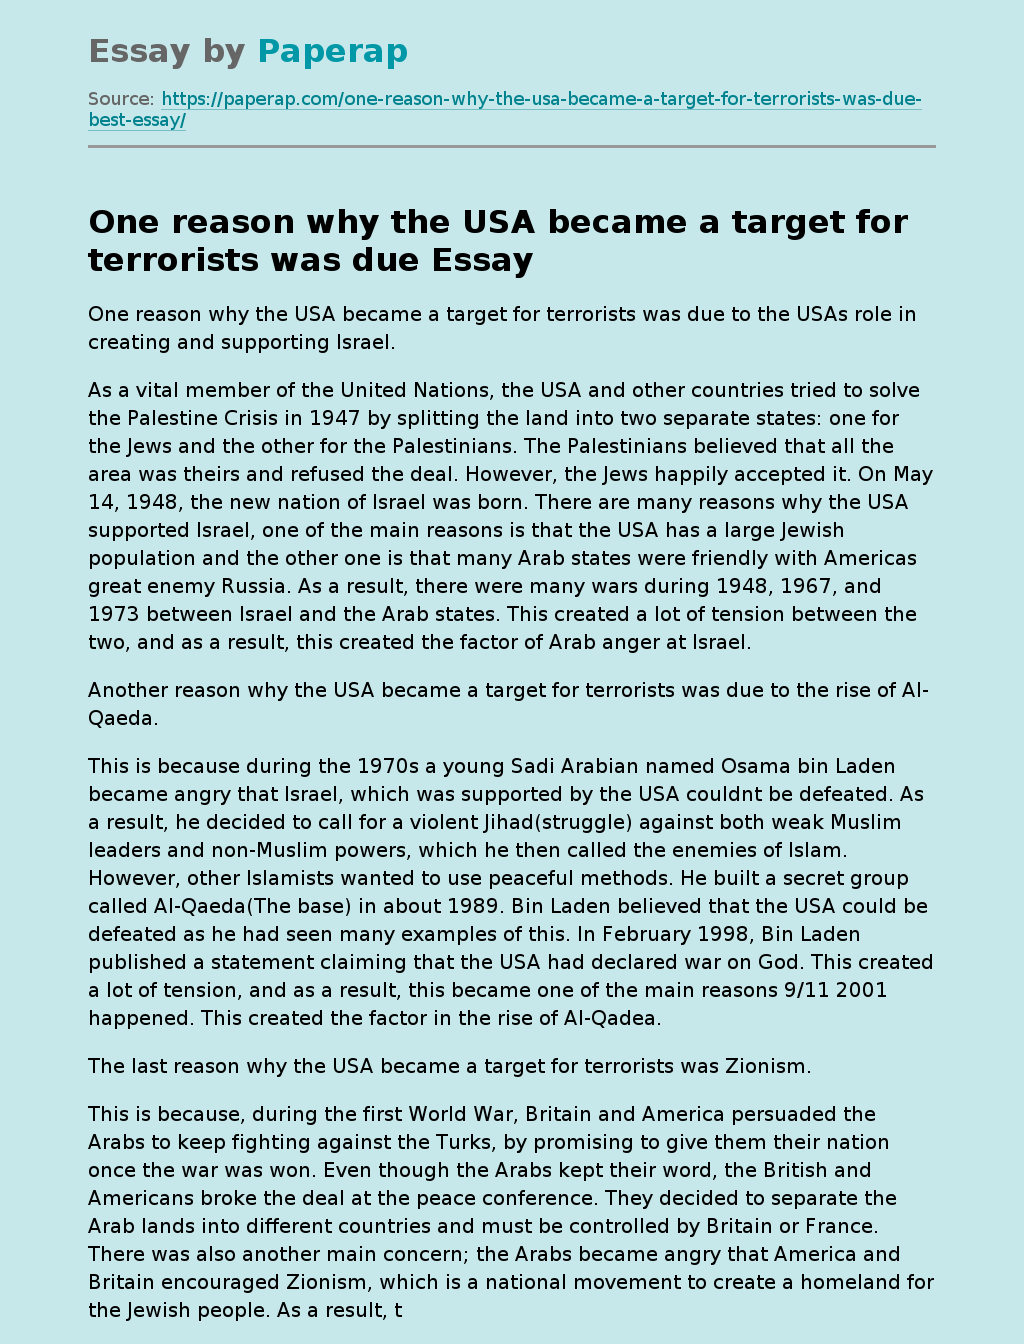 One reason why the USA became a target for terrorists was due